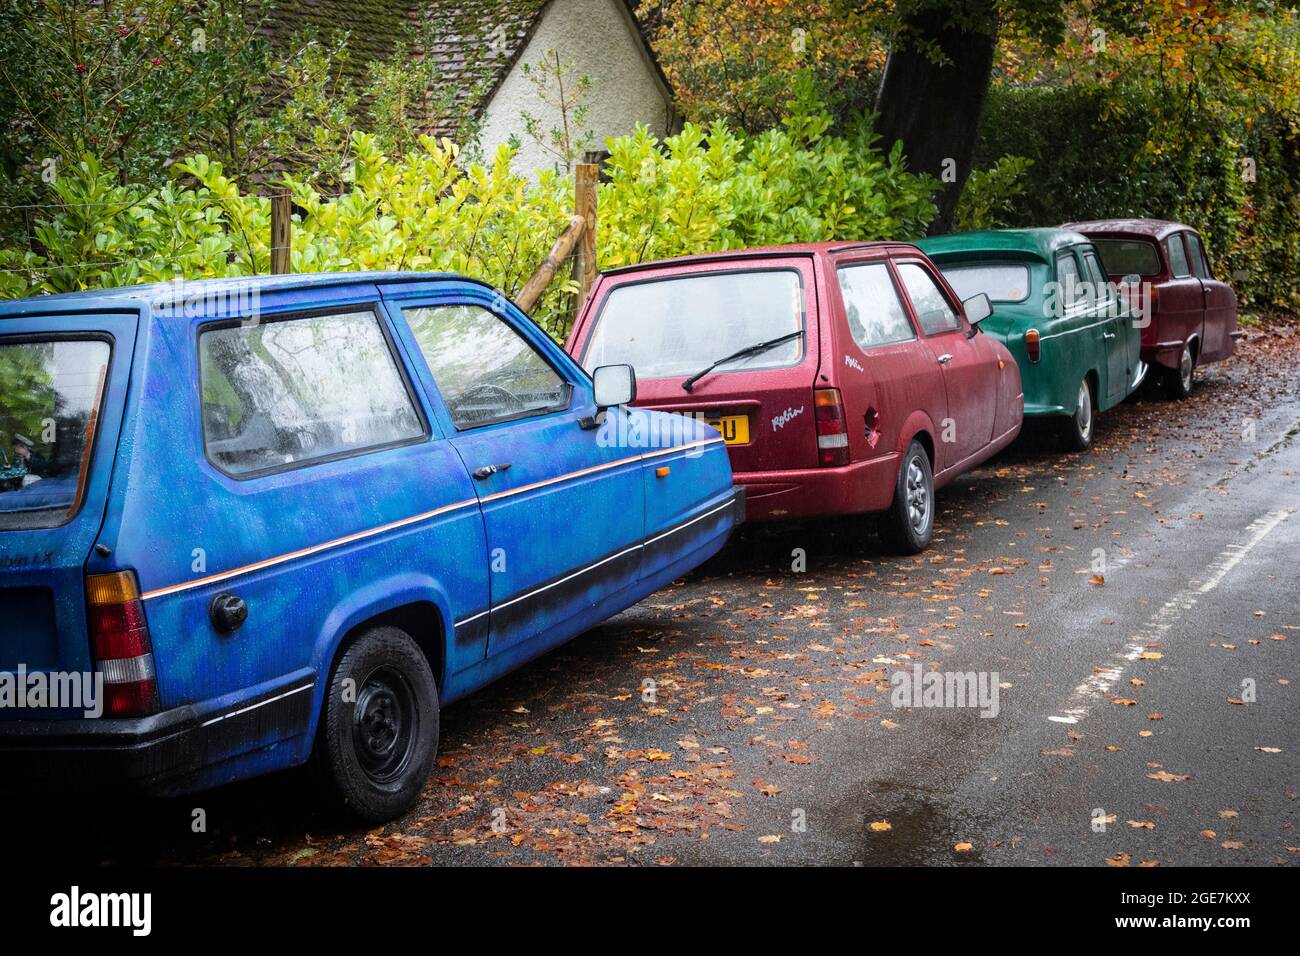 Four Reliant Robins parked in a country road, Surrey, England. Stock Photo